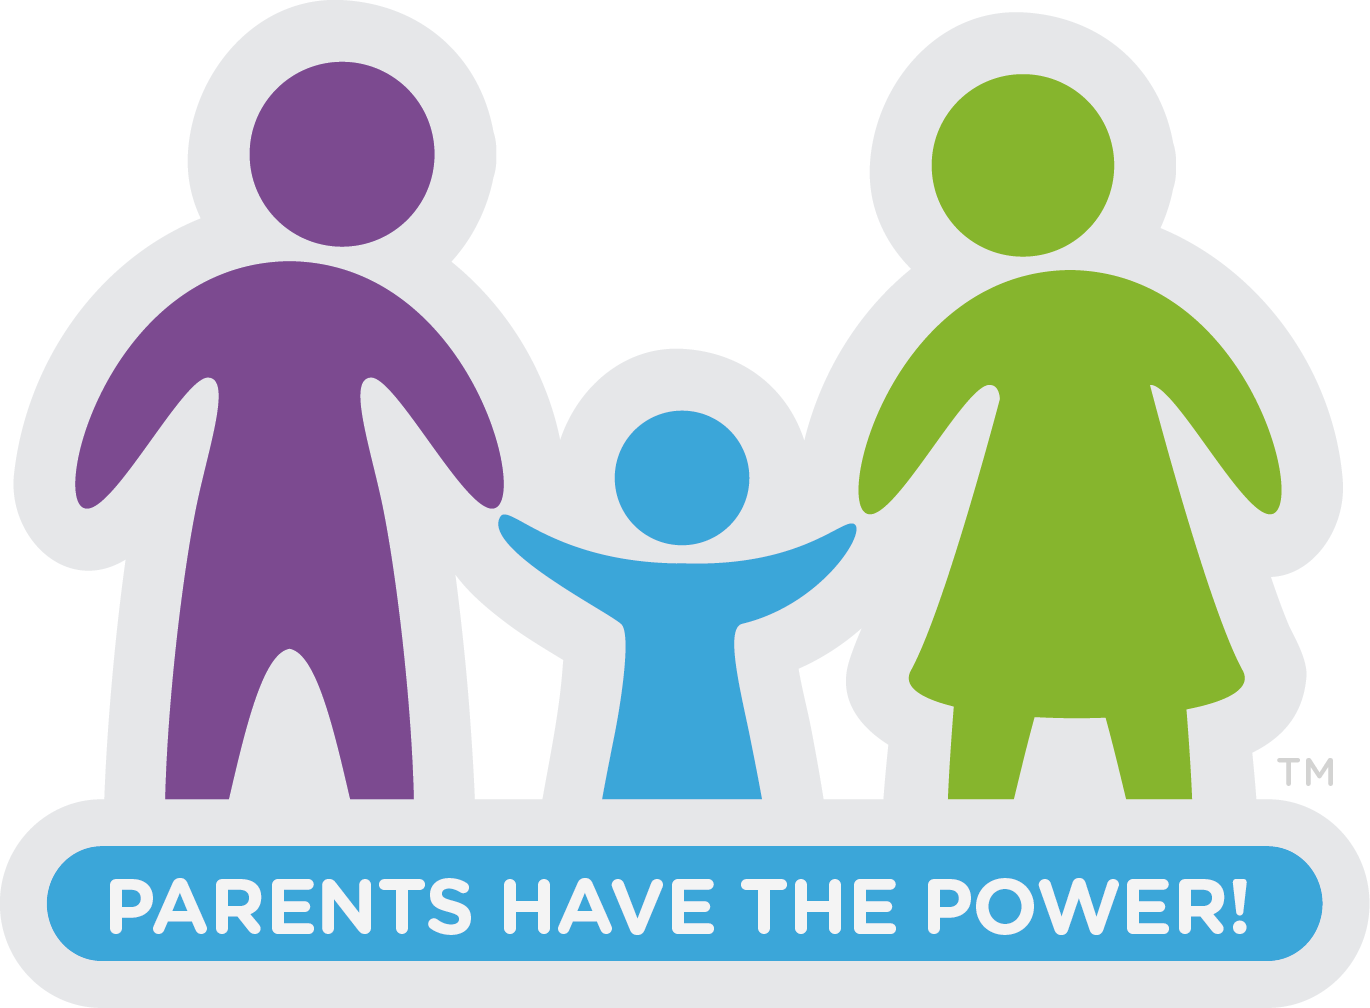 Graphic illustration of two adults holding hands with a child, with the caption "Parents Have the Power!"